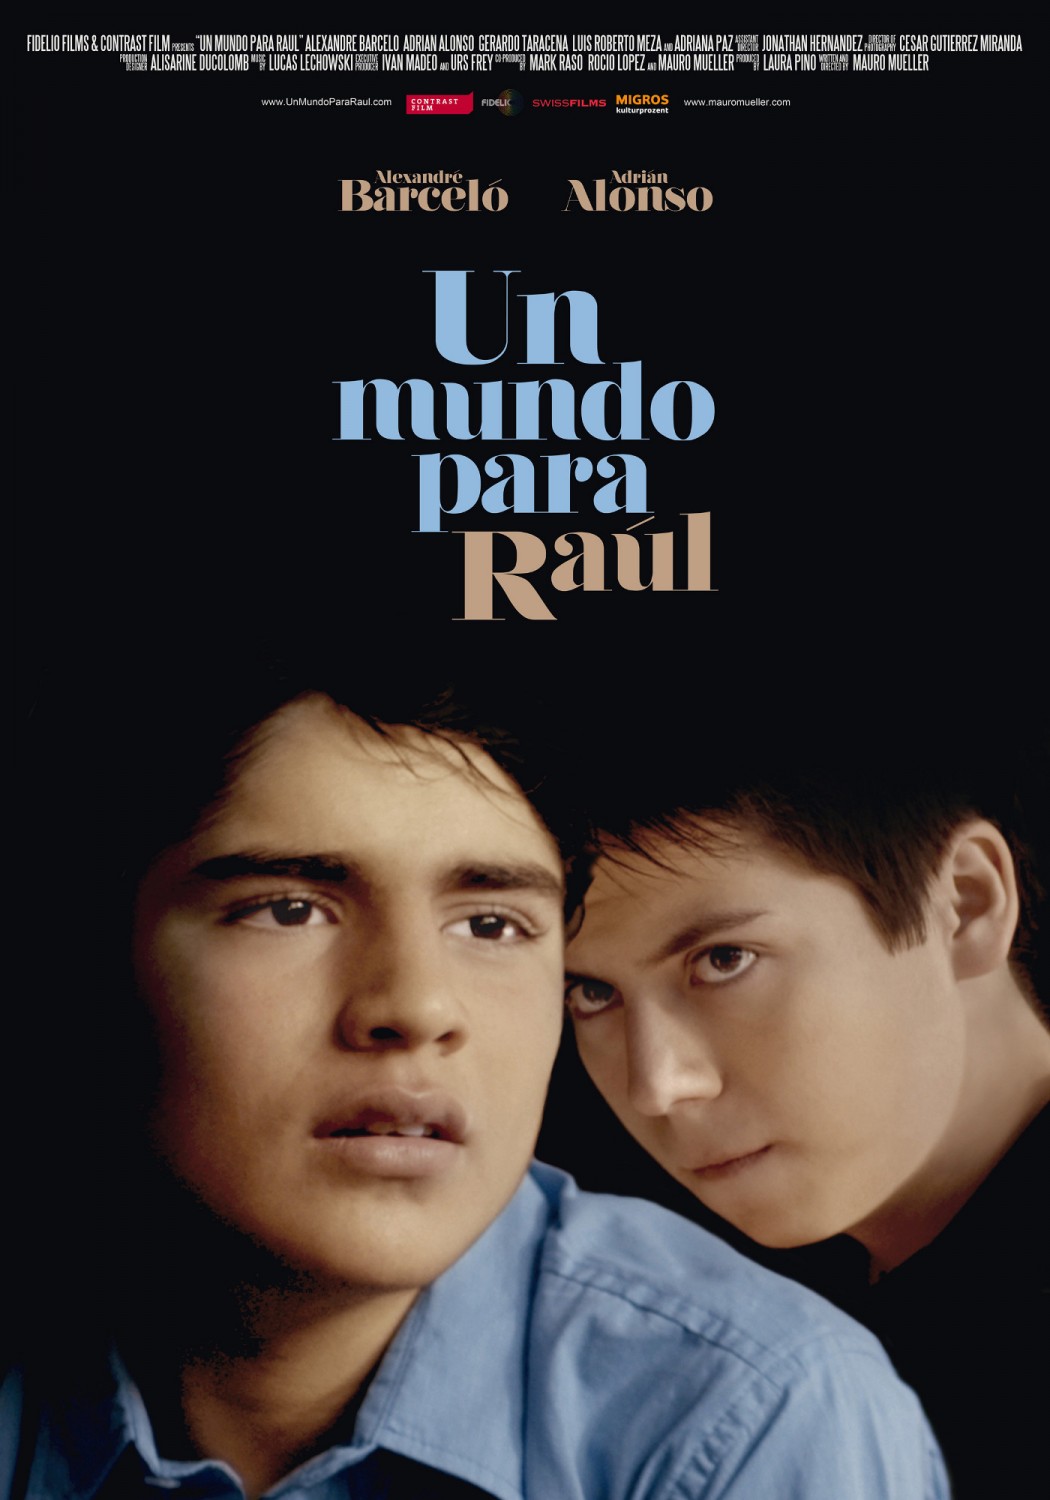 Extra Large Movie Poster Image for Un mundo para Ral